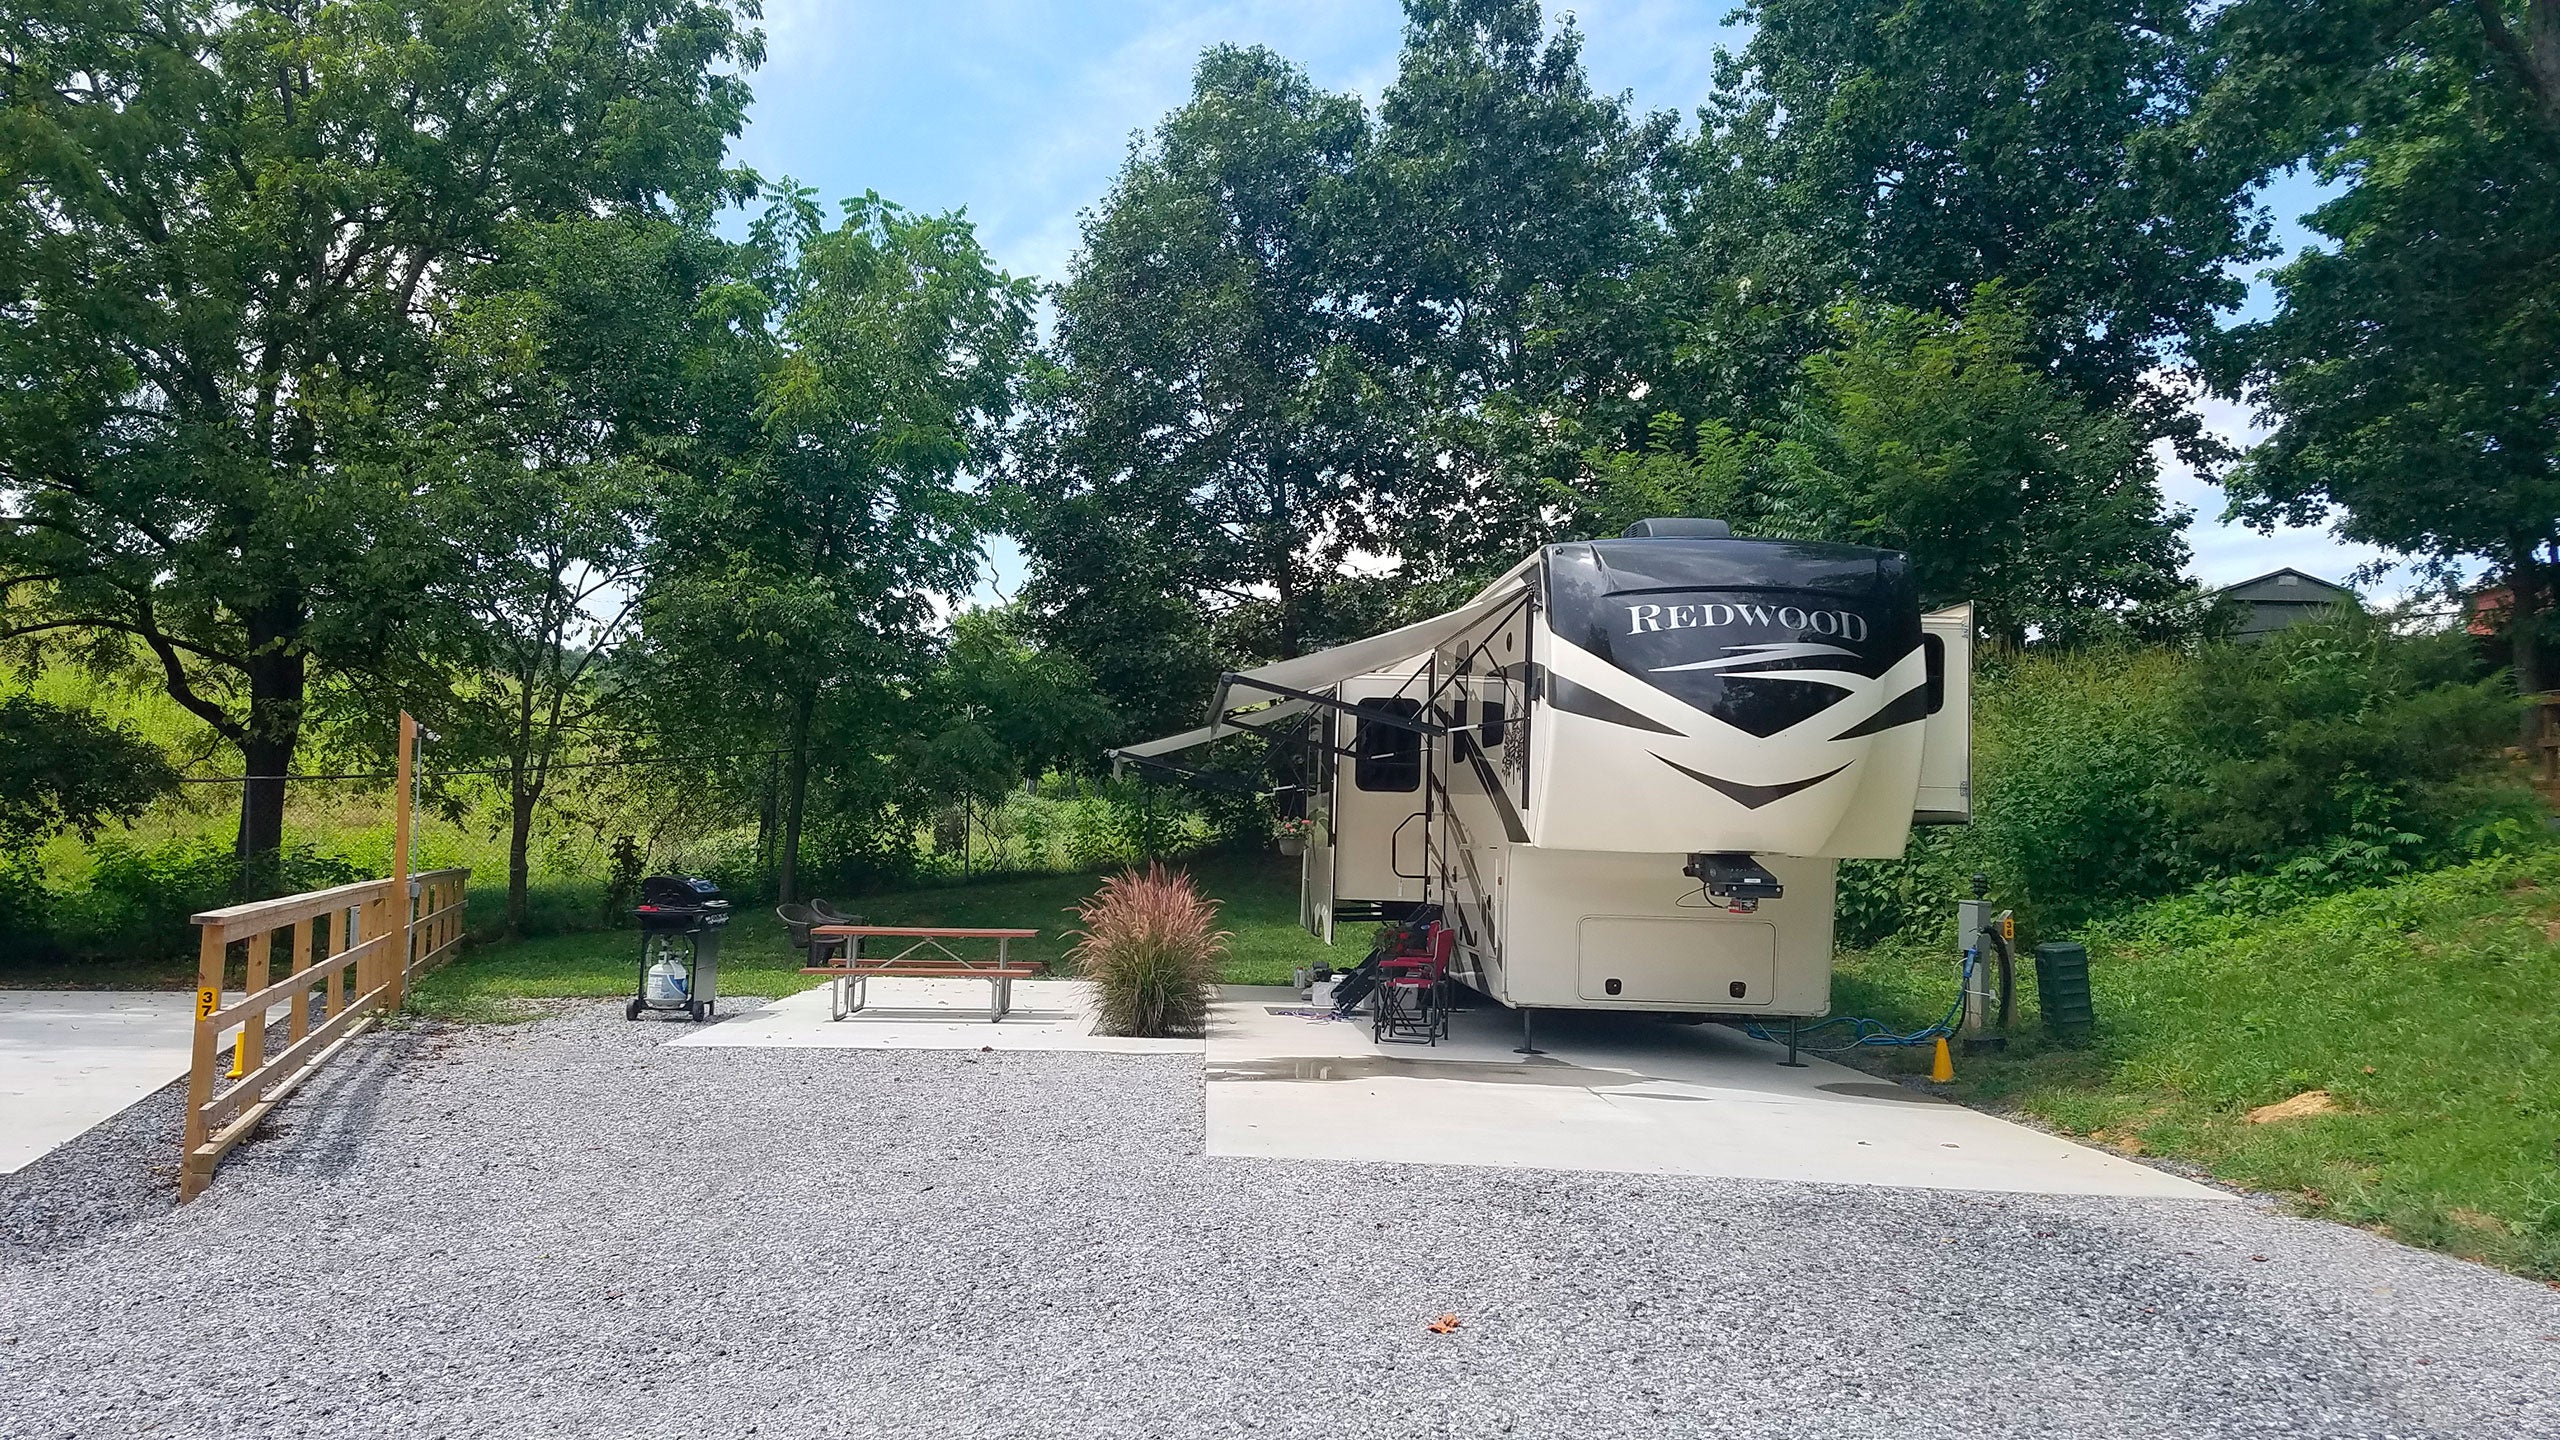  Rv motor home is parked at a campsite rv park